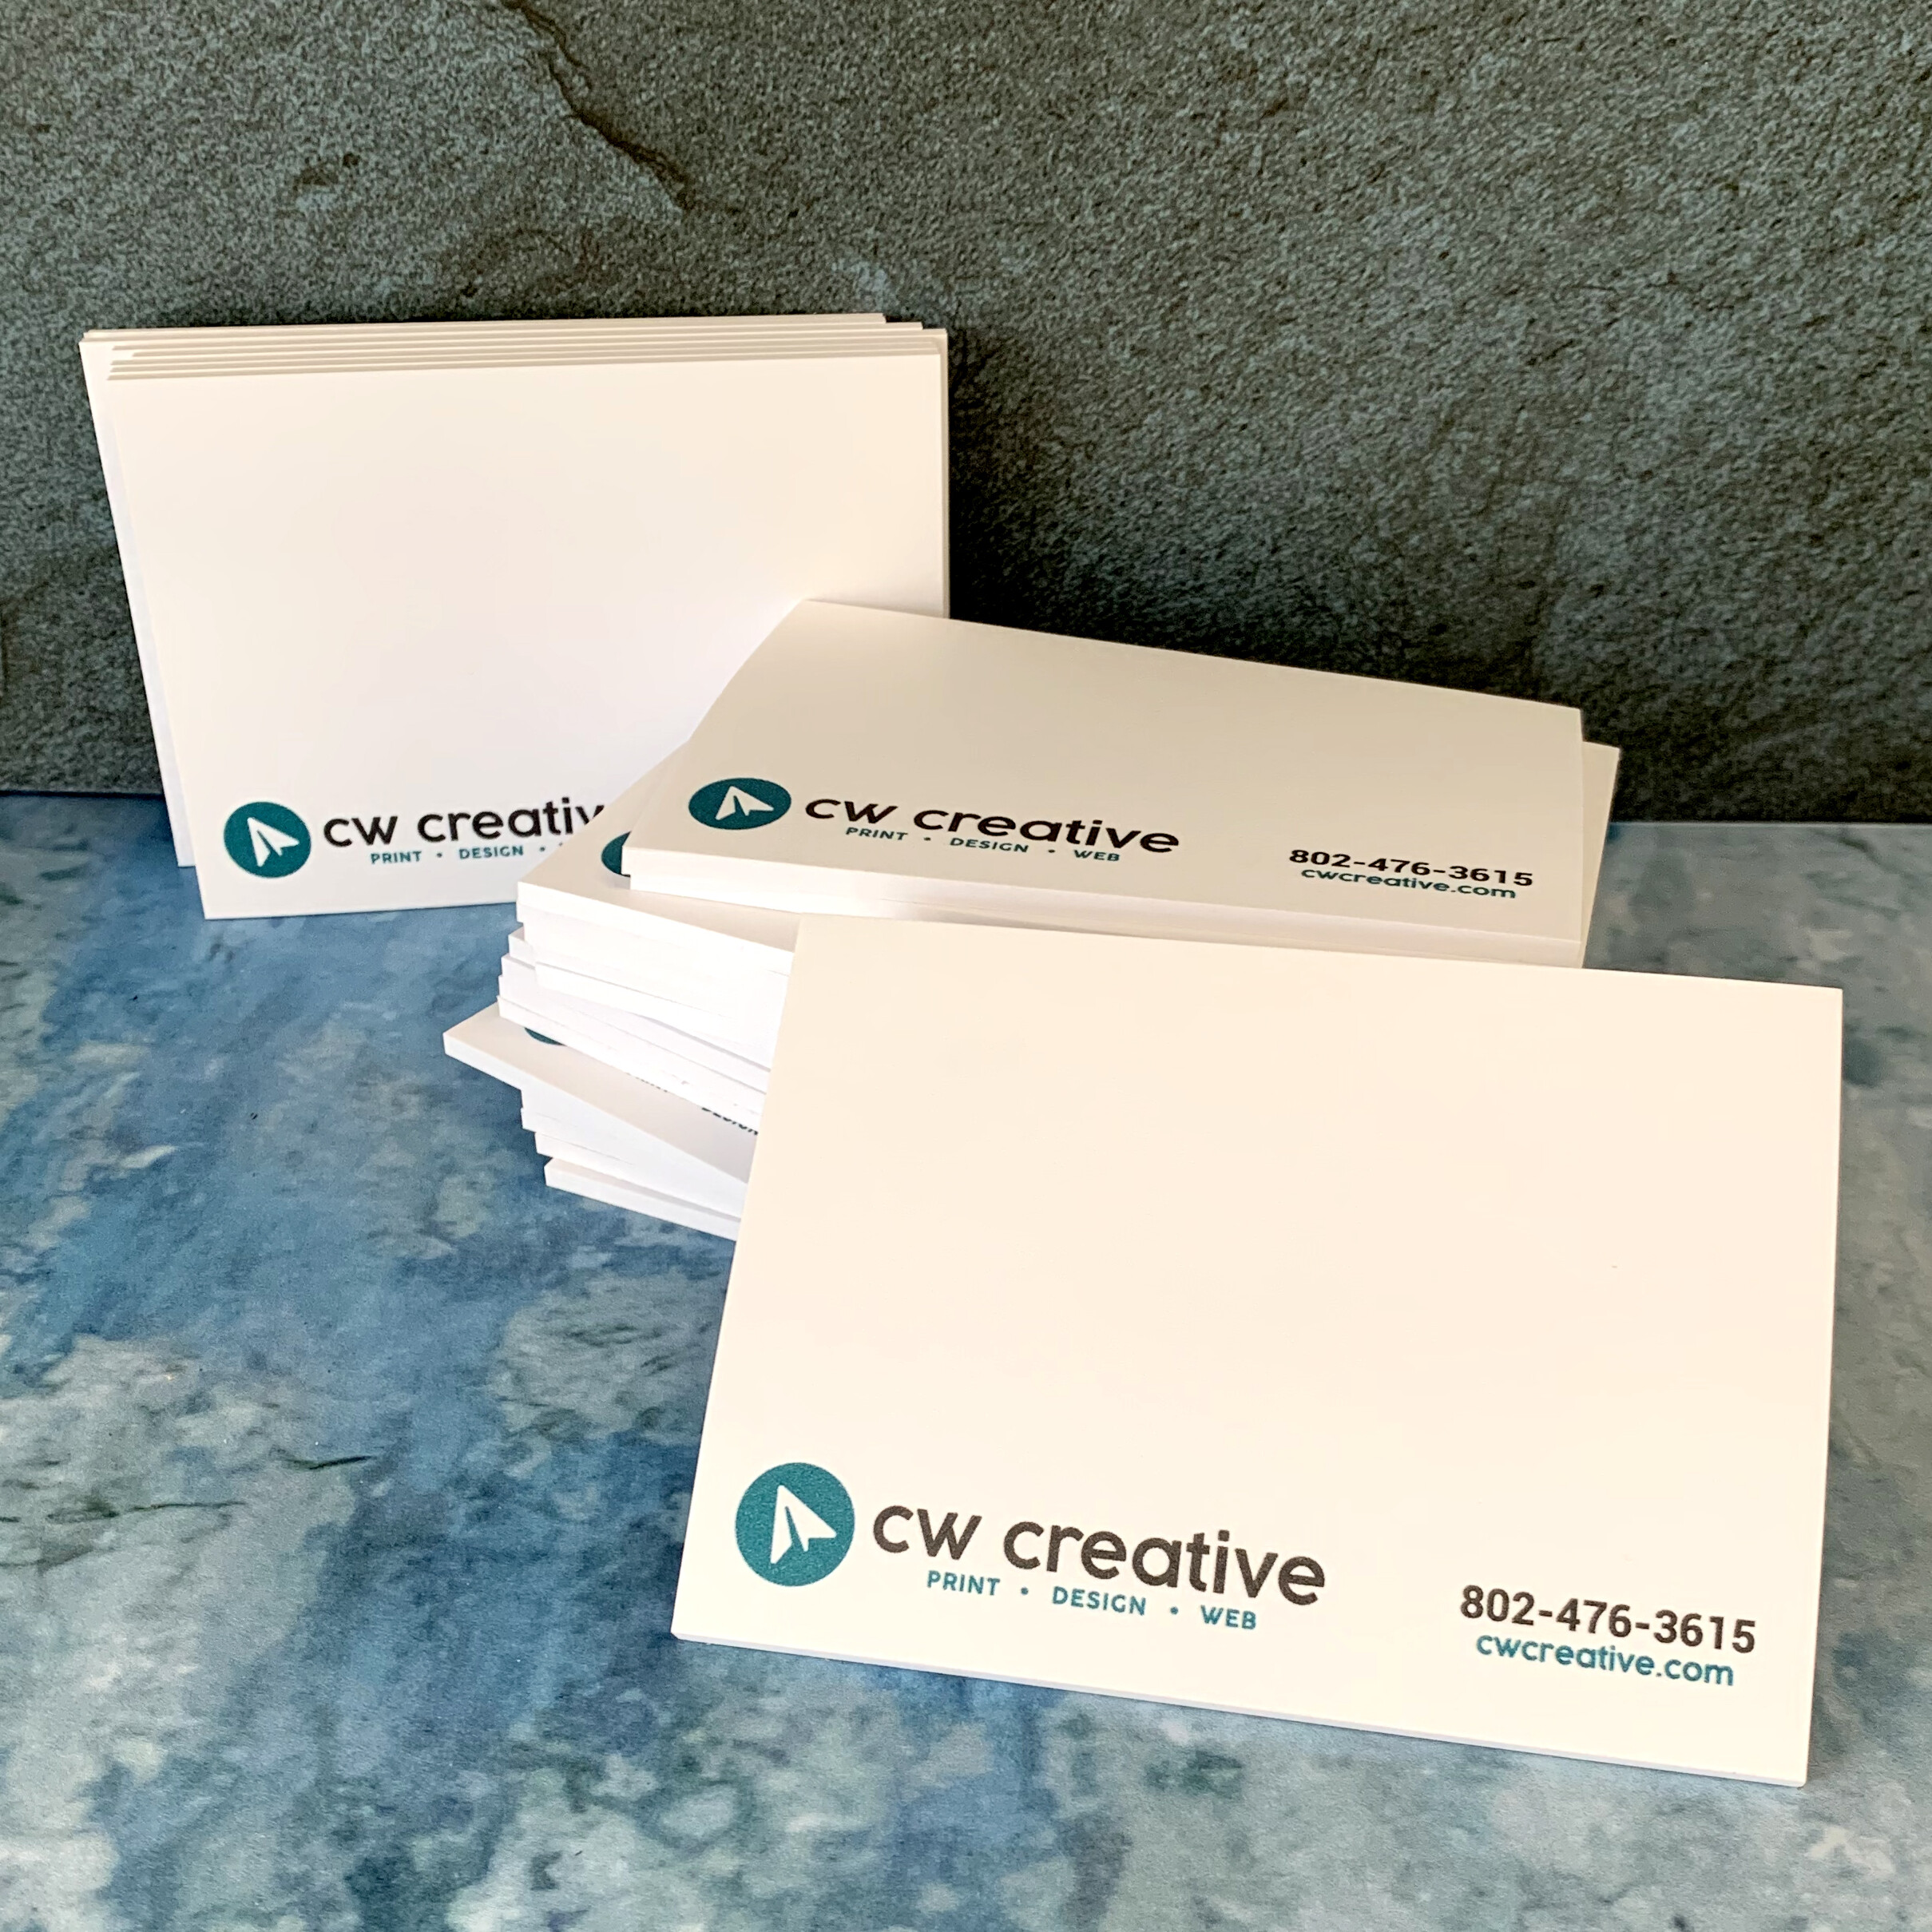 Promotional Post It Notes - CW Creative